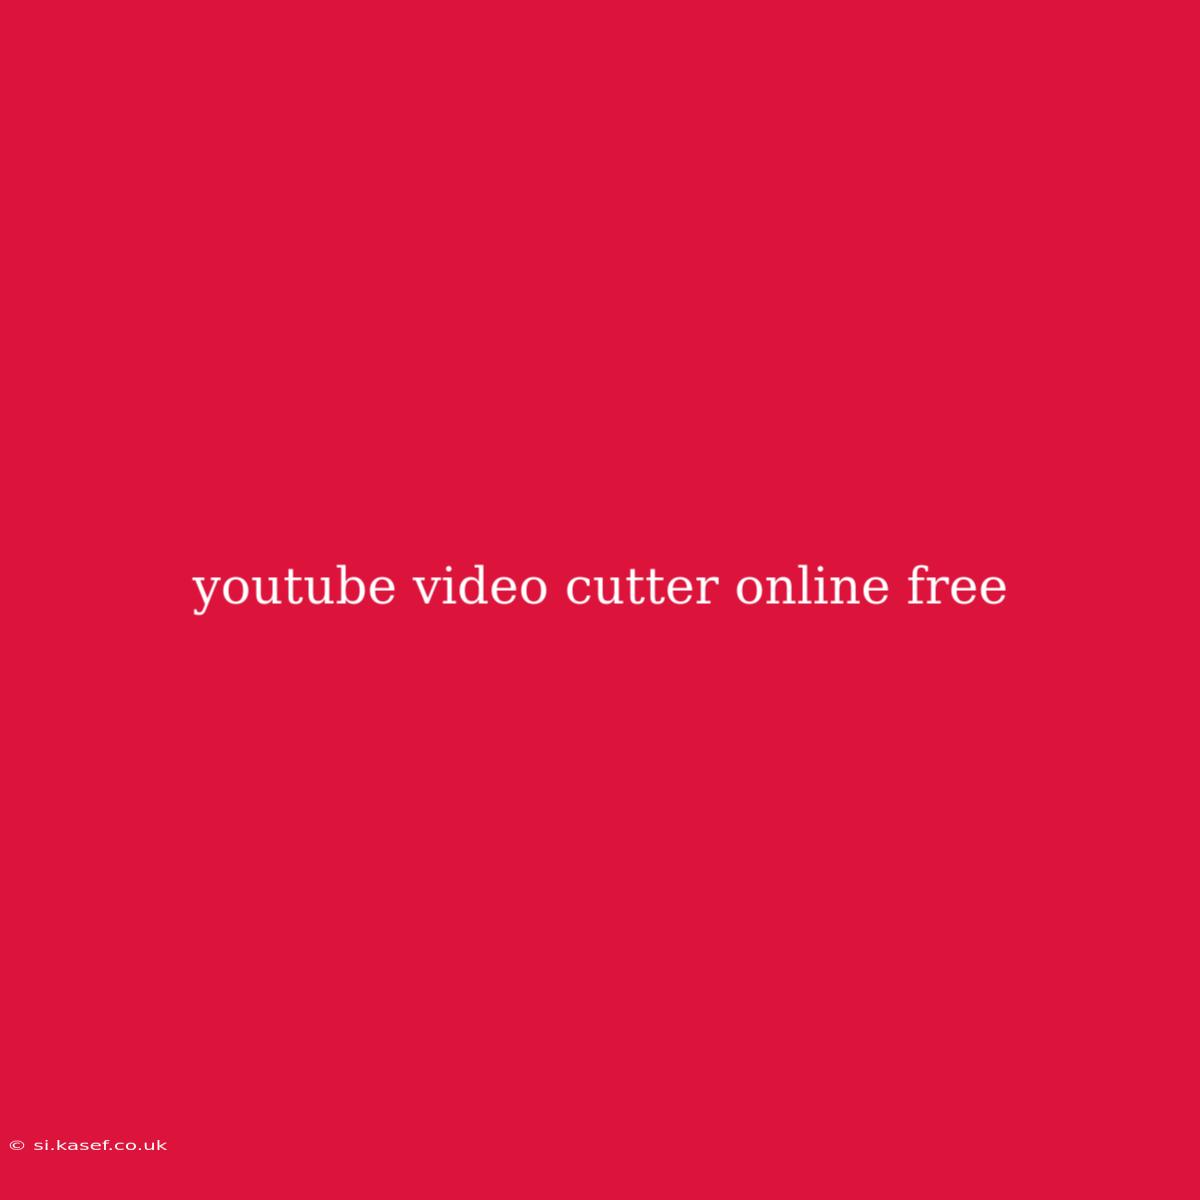 Youtube Video Cutter Online Free